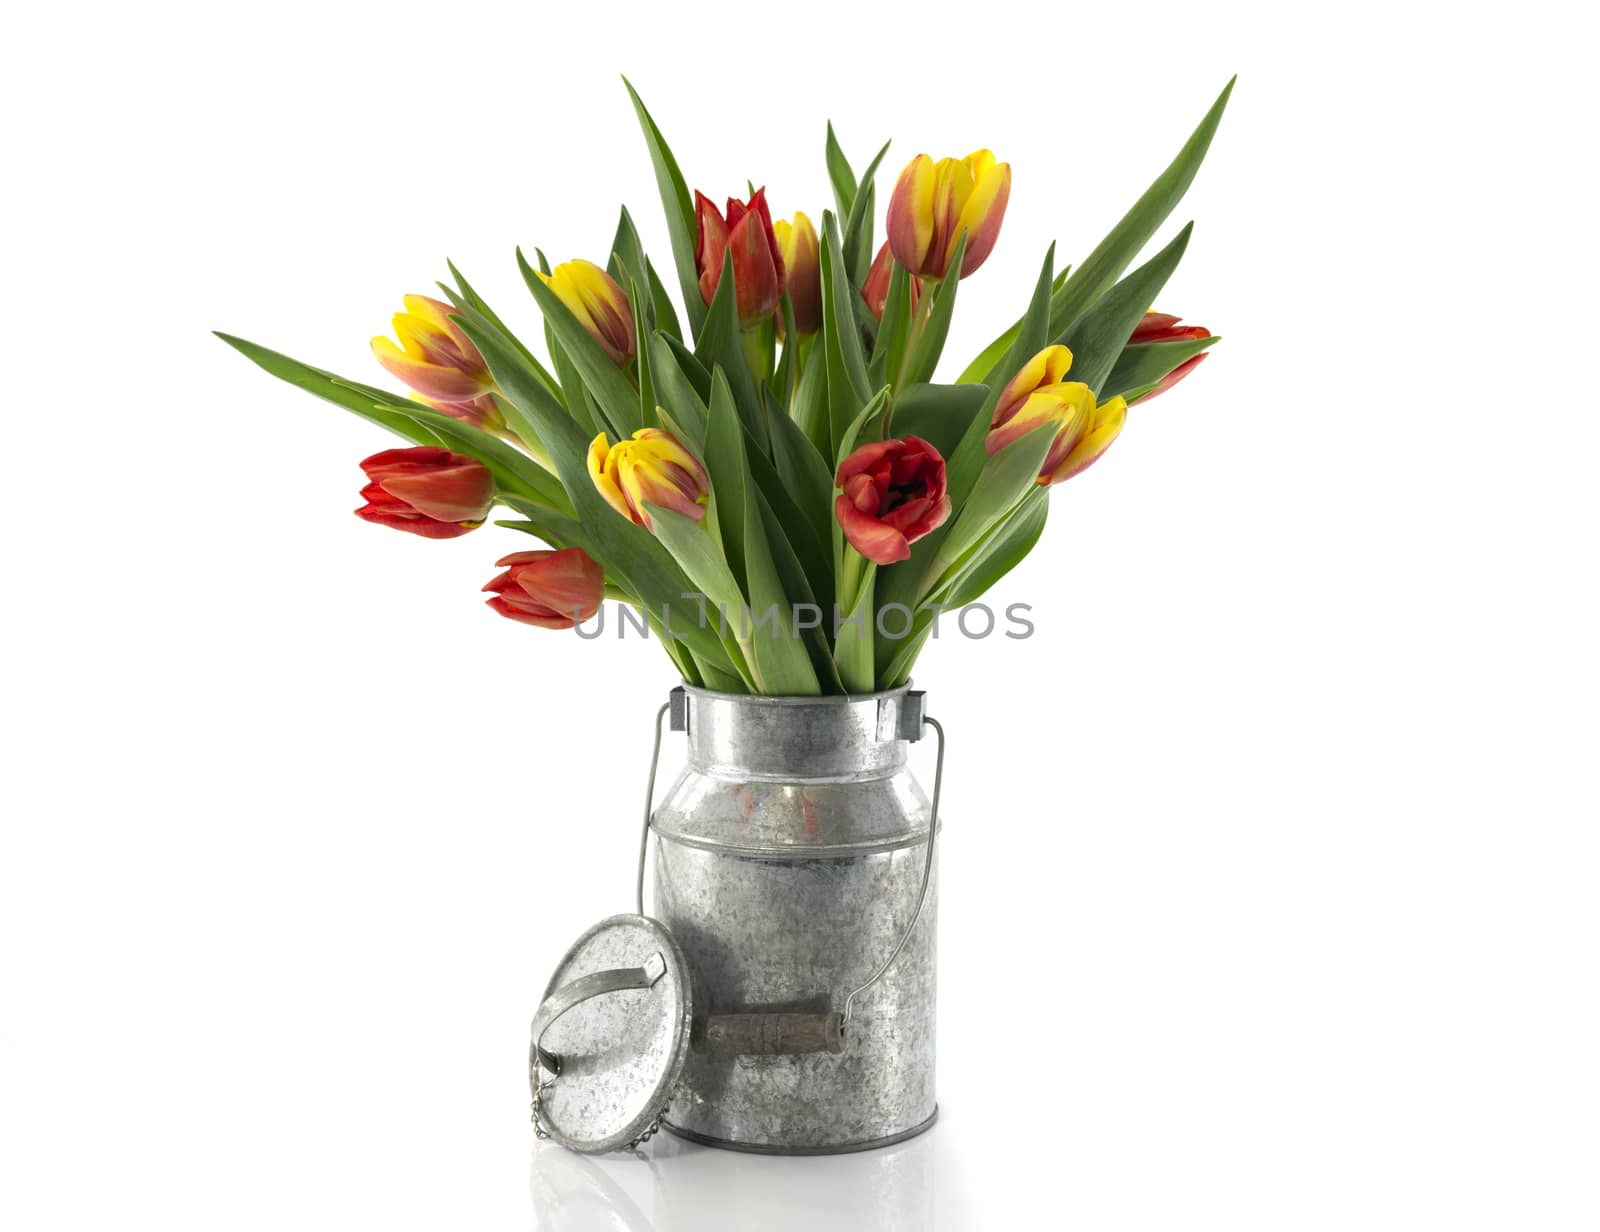 red and yellow tulips by compuinfoto